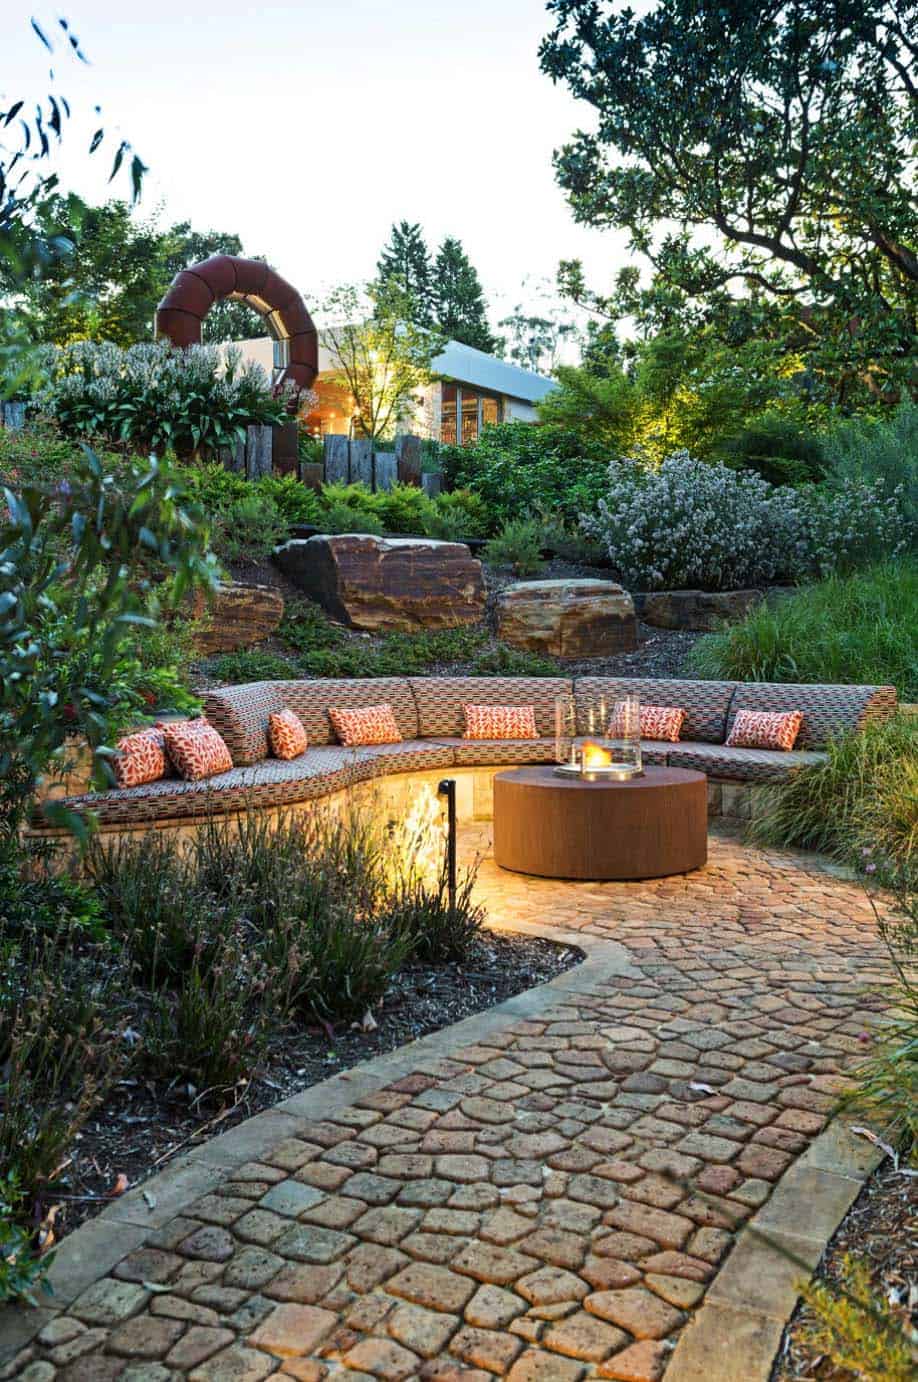 patio modern outdoor kindesign designs popular articles featured most blow mind